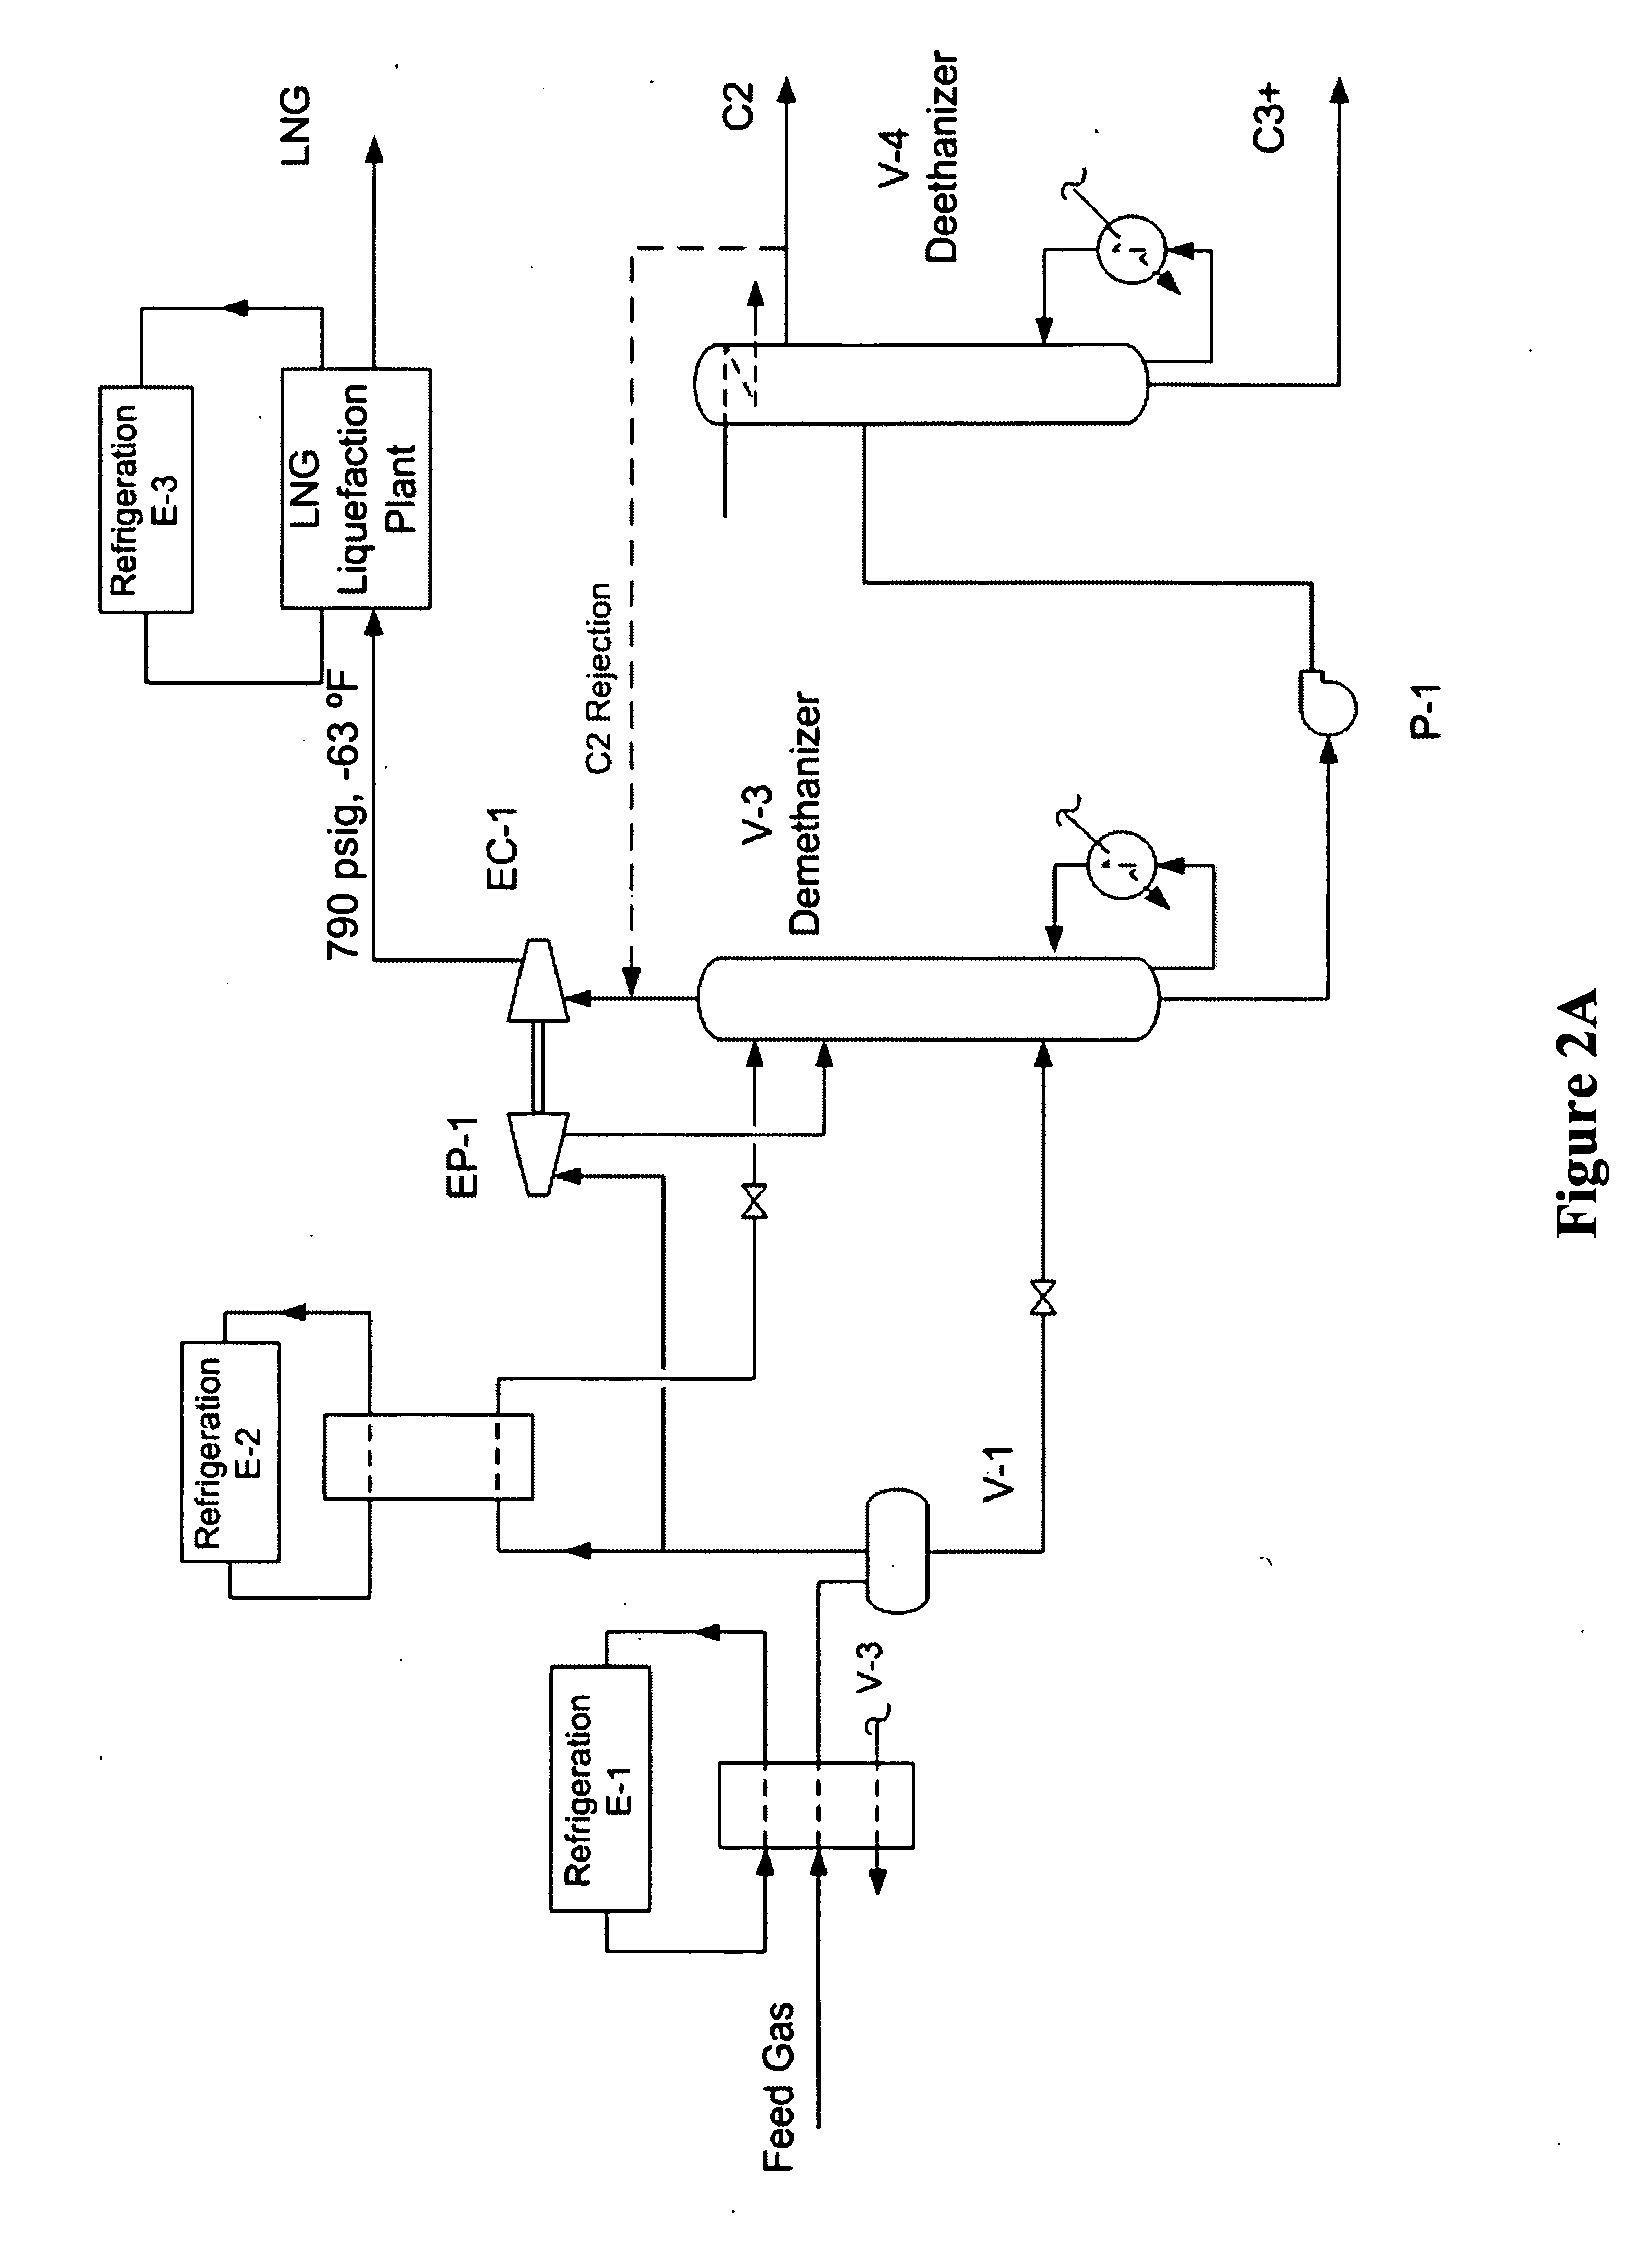 Configurations and methods of integrated NGL recovery and LNG liquefaction